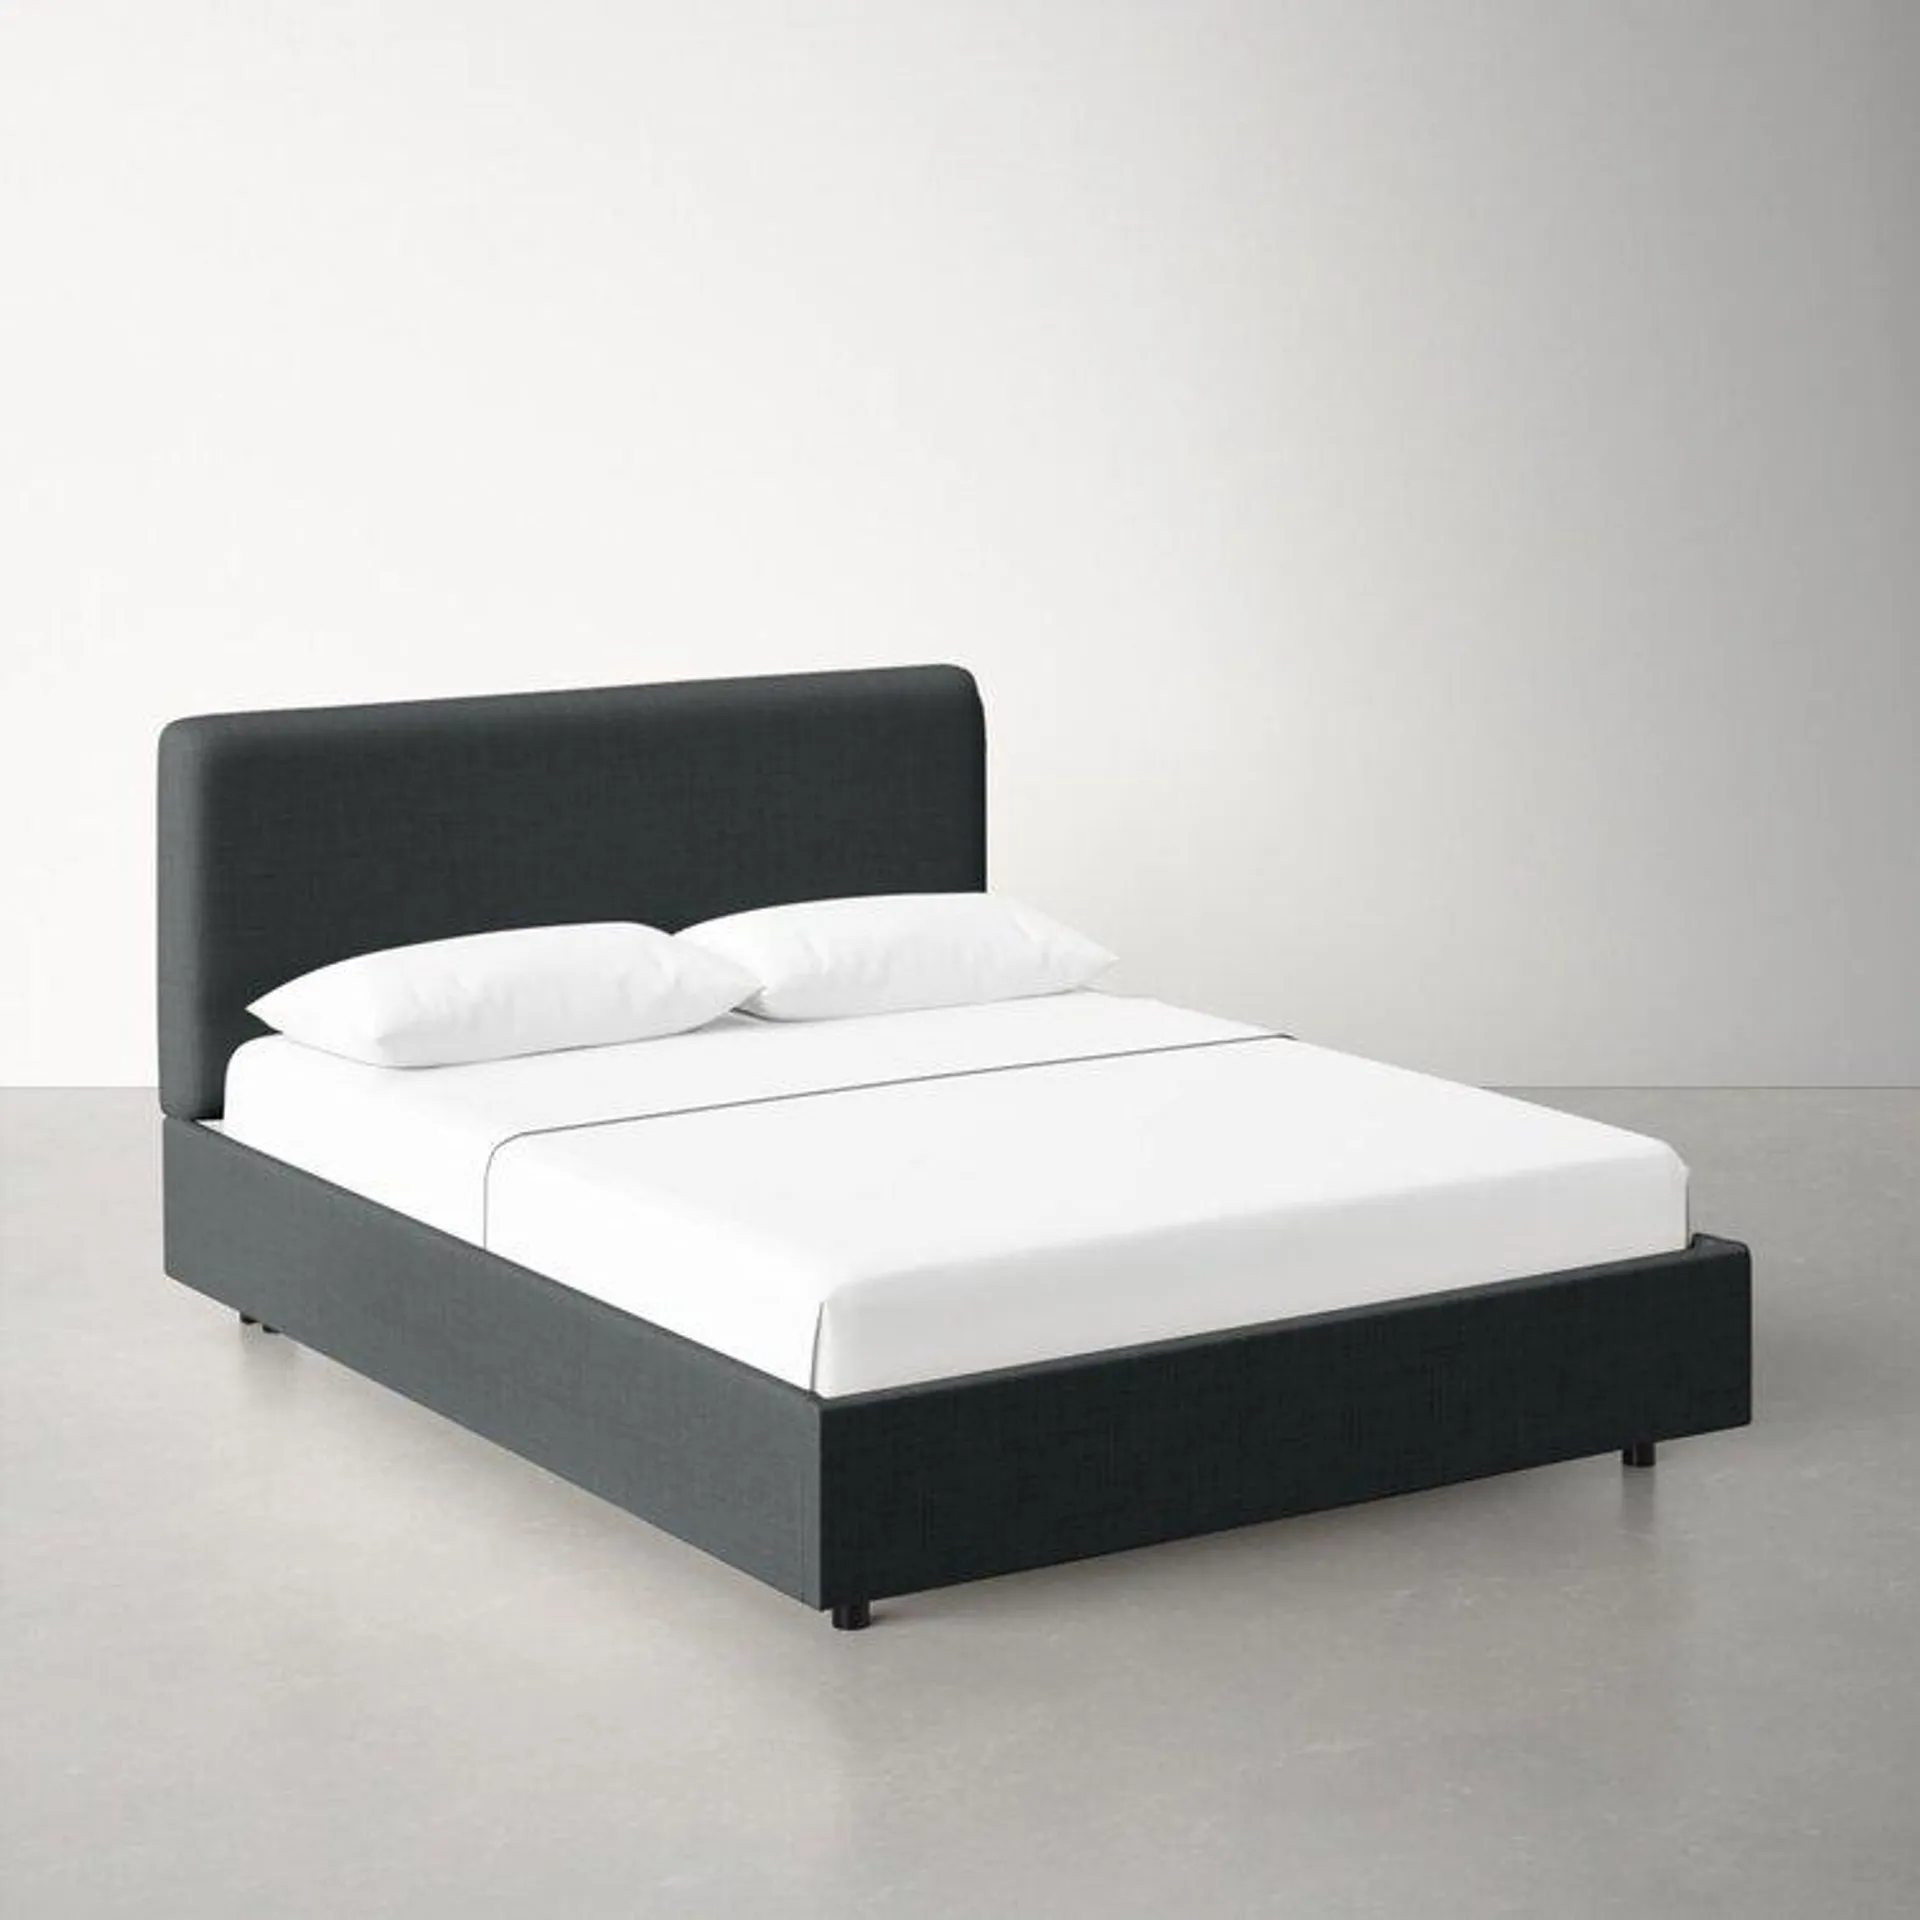 Eisley Upholstered Bed